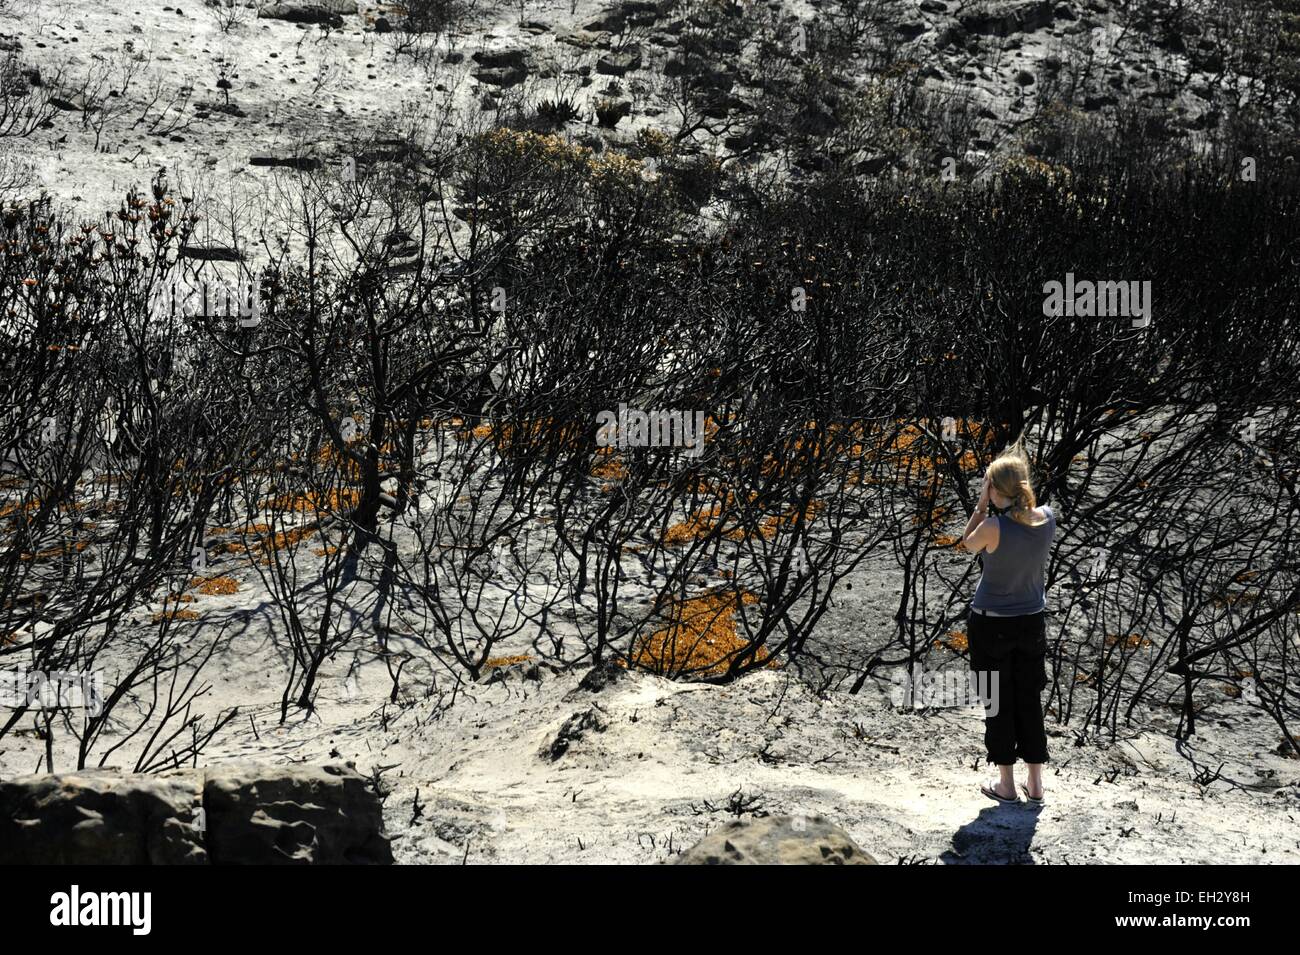 Cape Town, South Africa. 5th March, 2015. Burnt vegetation and scorched rocks at Silver mine on Our Kaapse Weg left after five days of wild fires that have destroyed thousands of hectares of land on the Cape Peninsula south of Table Mountain.      The fires stretched across the mountain from Muizenburg in the east over to Hout Bay and Fishhoek in the west. Strong winds have been hampering efforts to contain the fires. Credit:  STUART WALKER/Alamy Live News Stock Photo